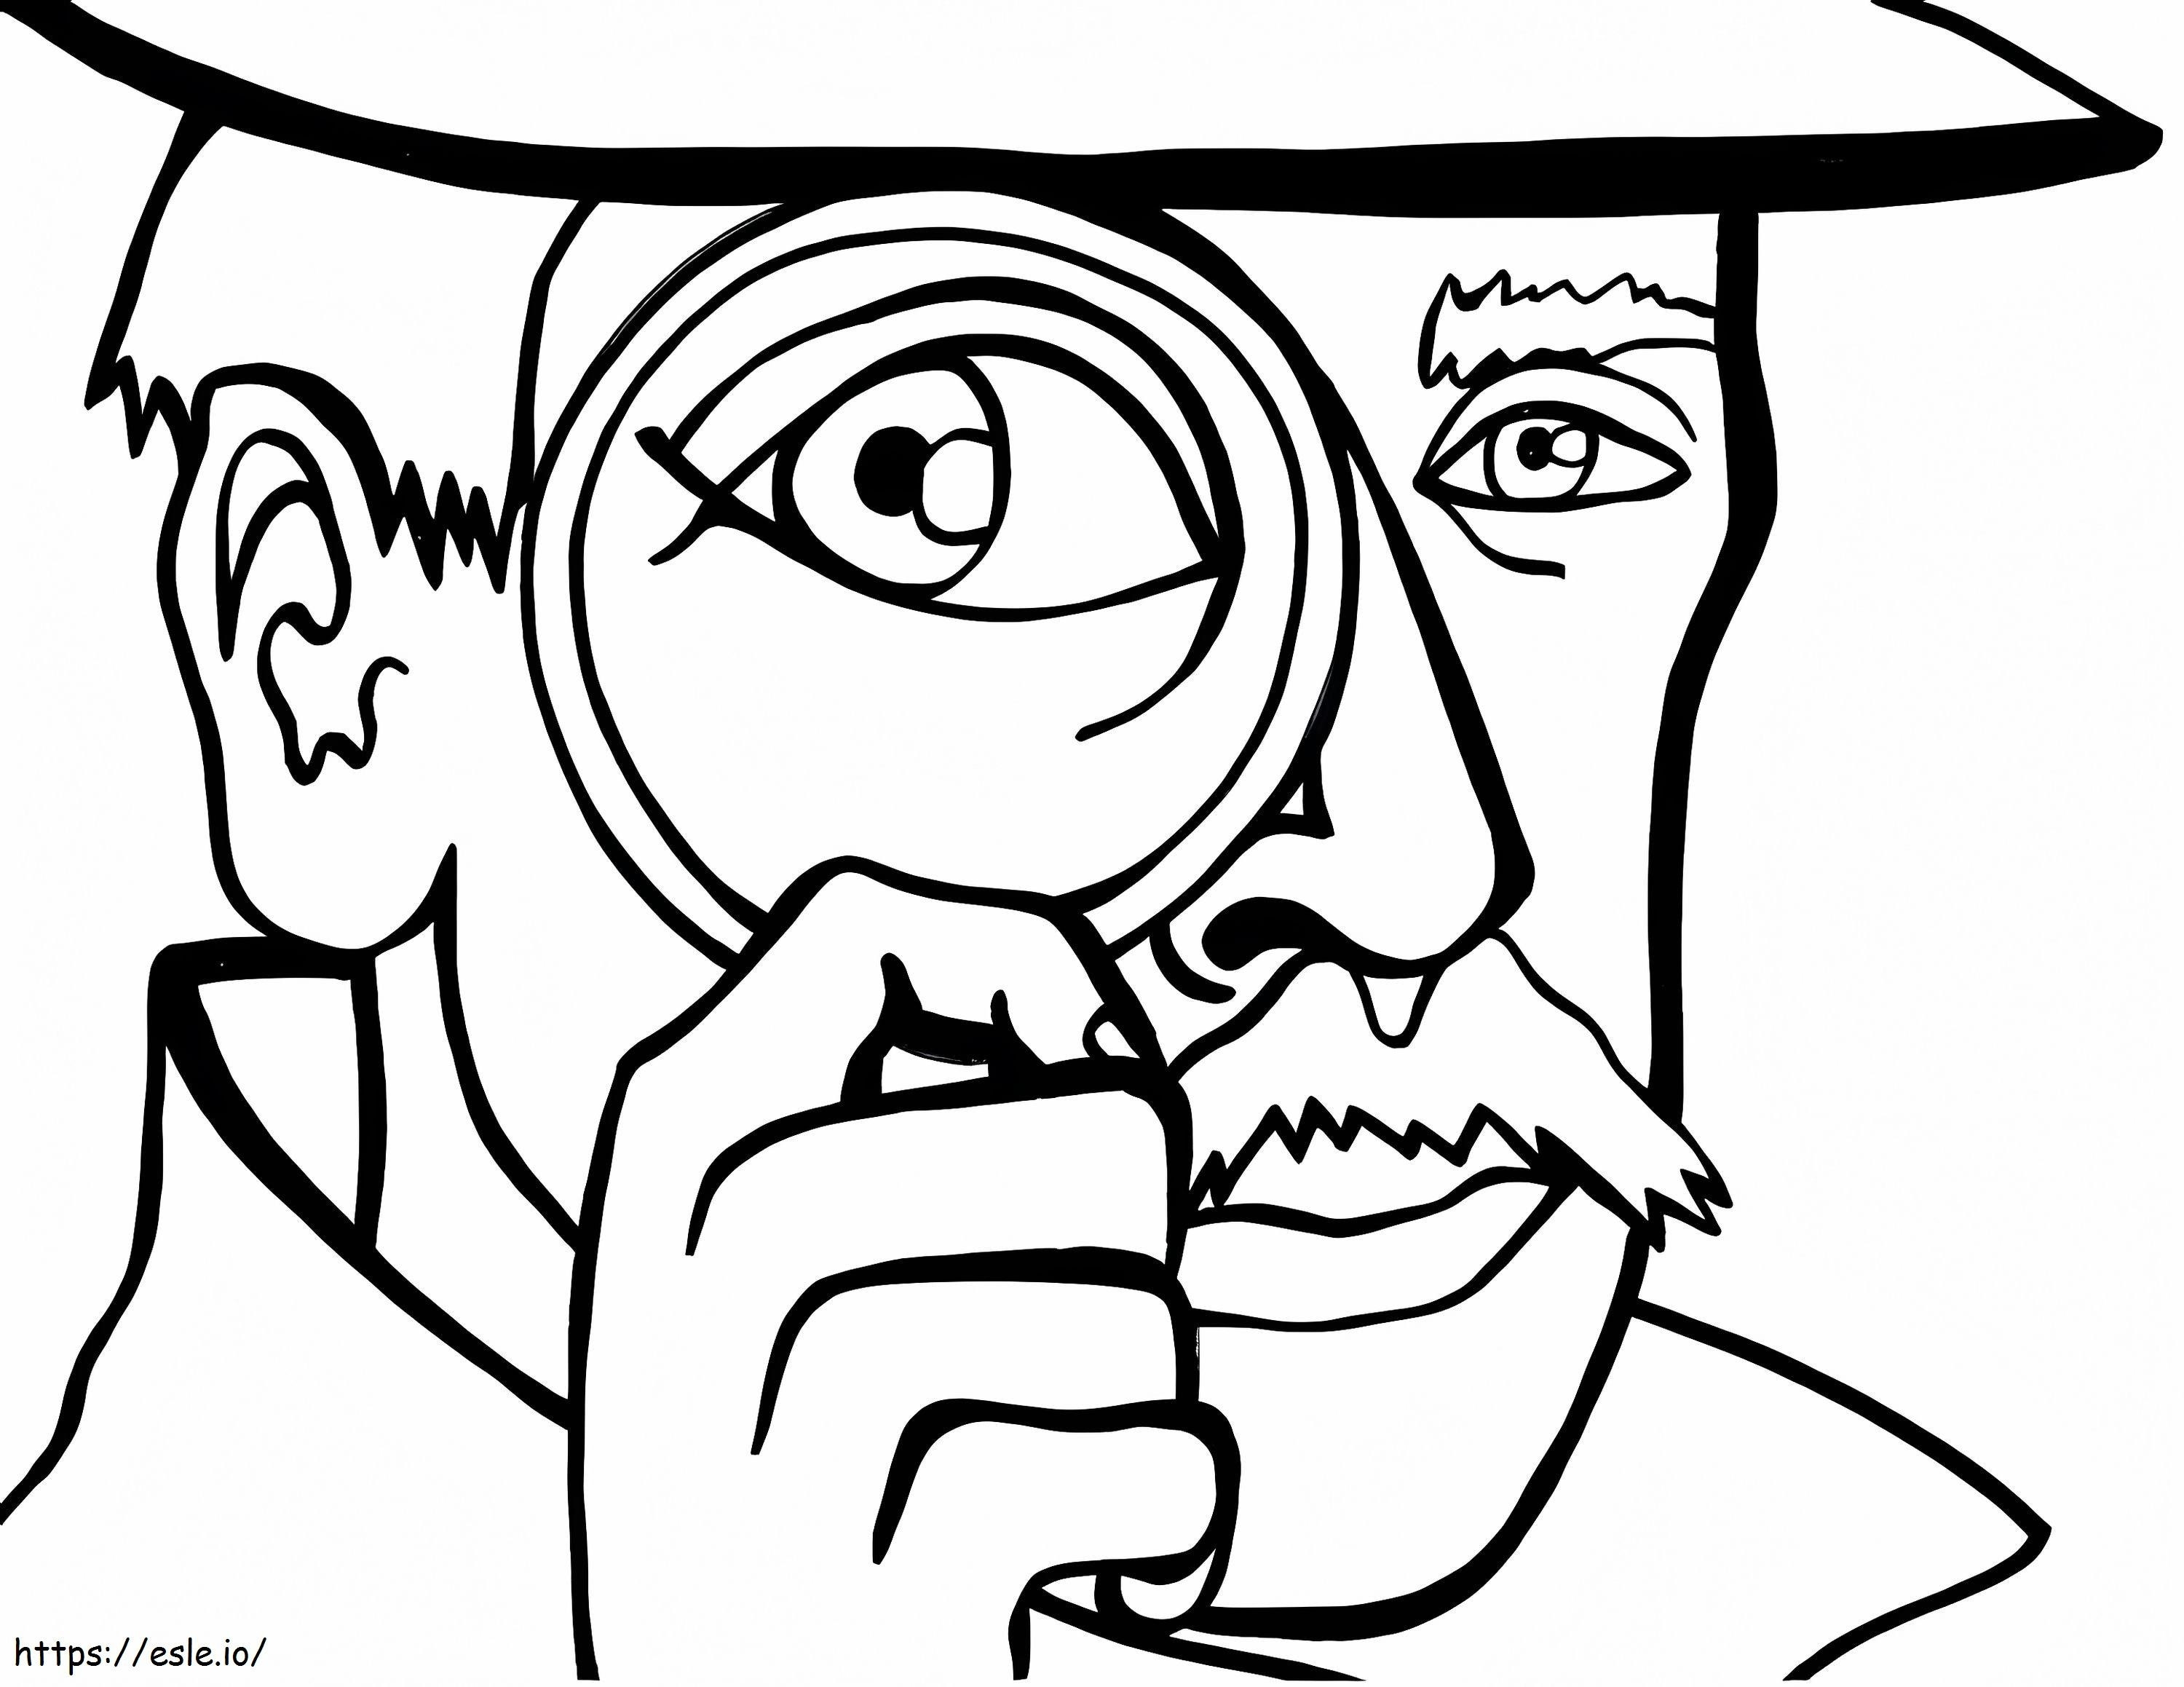 Detective 4 coloring page